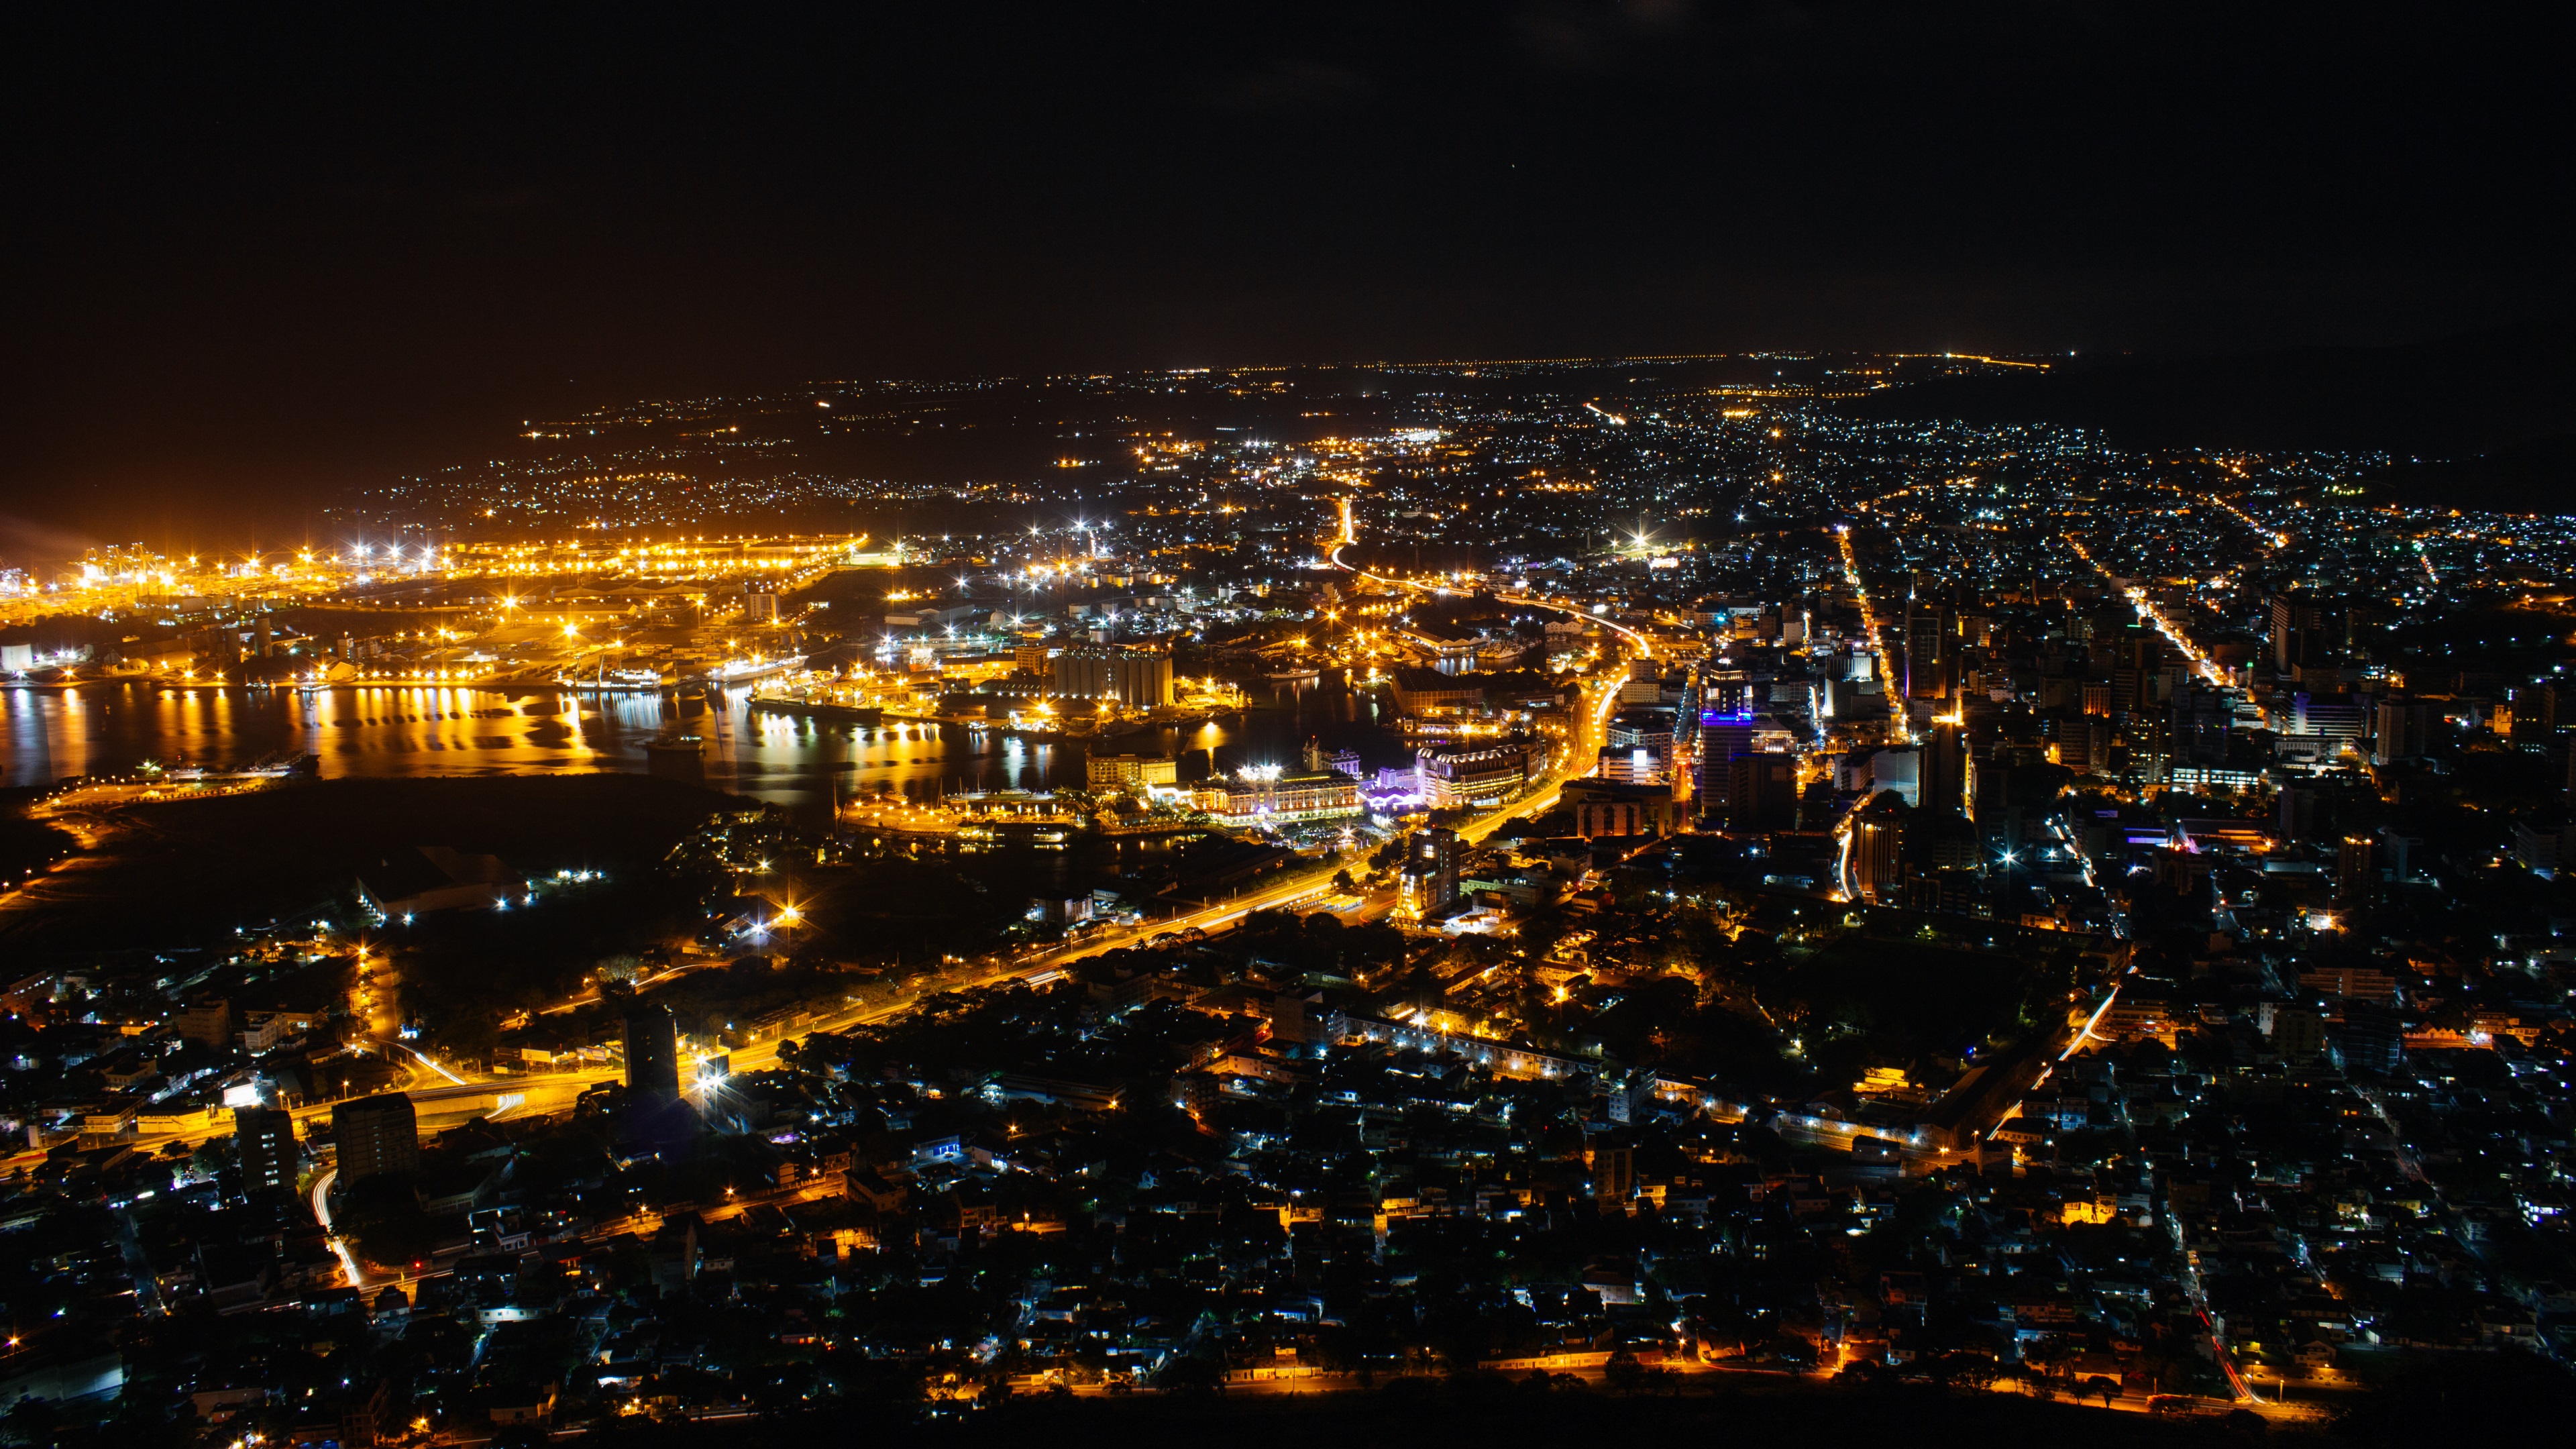 Best Port Louis Background for mobile